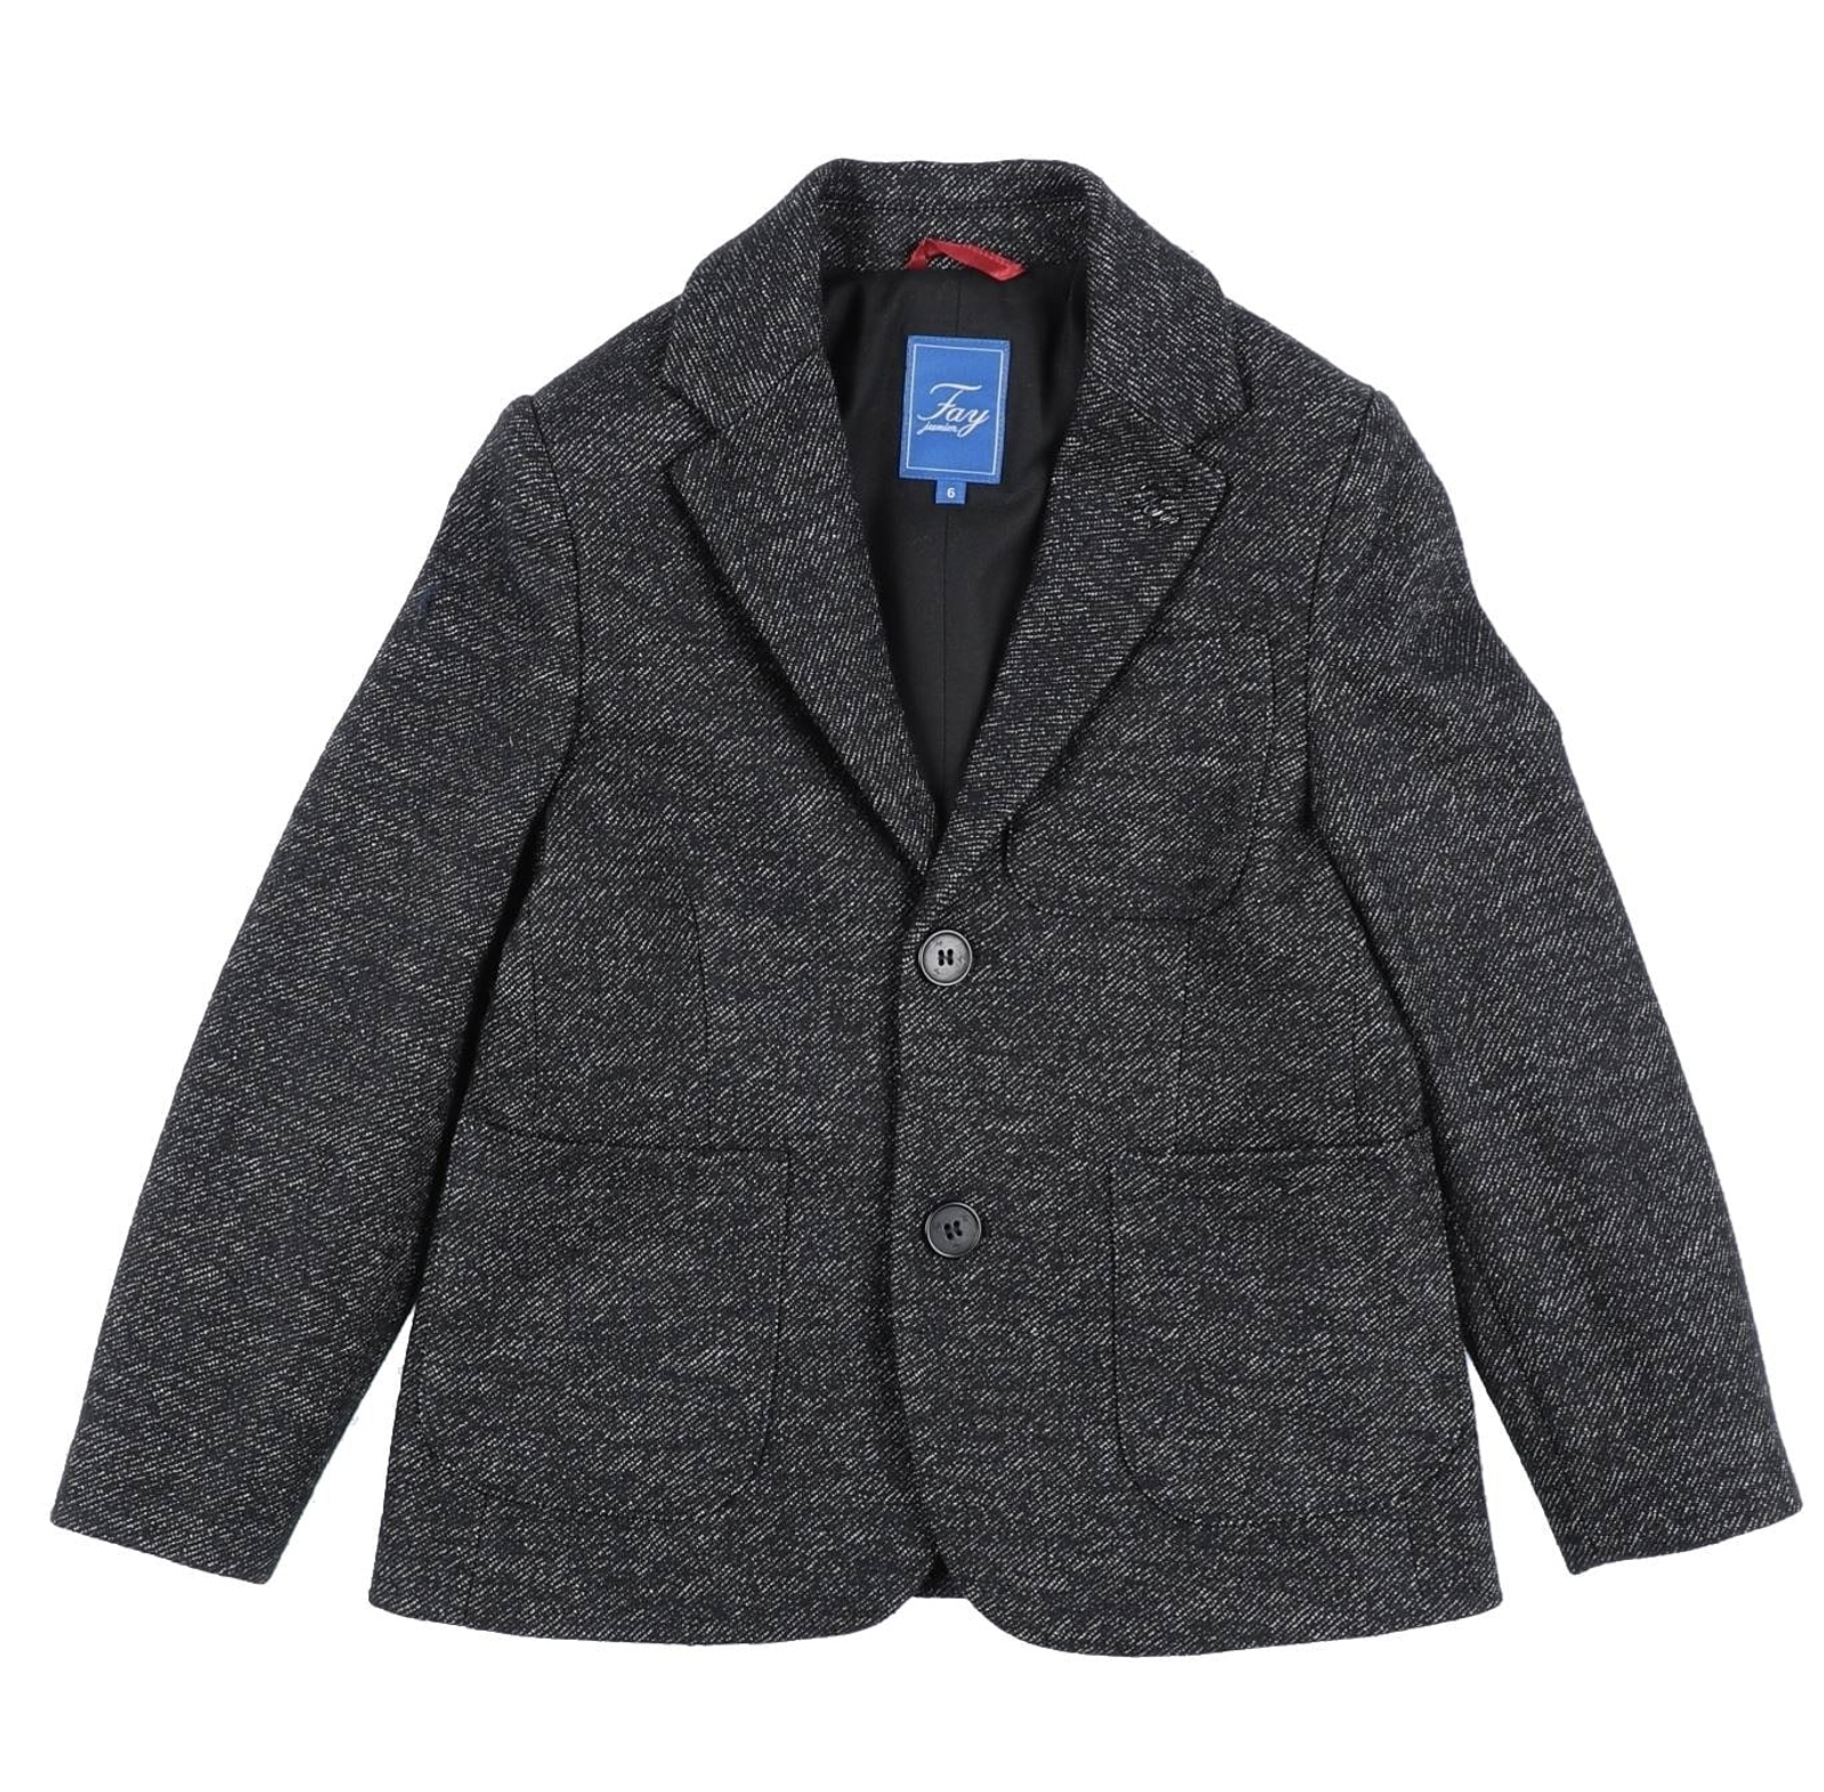 FAY - Gray flannel jacket - 6 years old